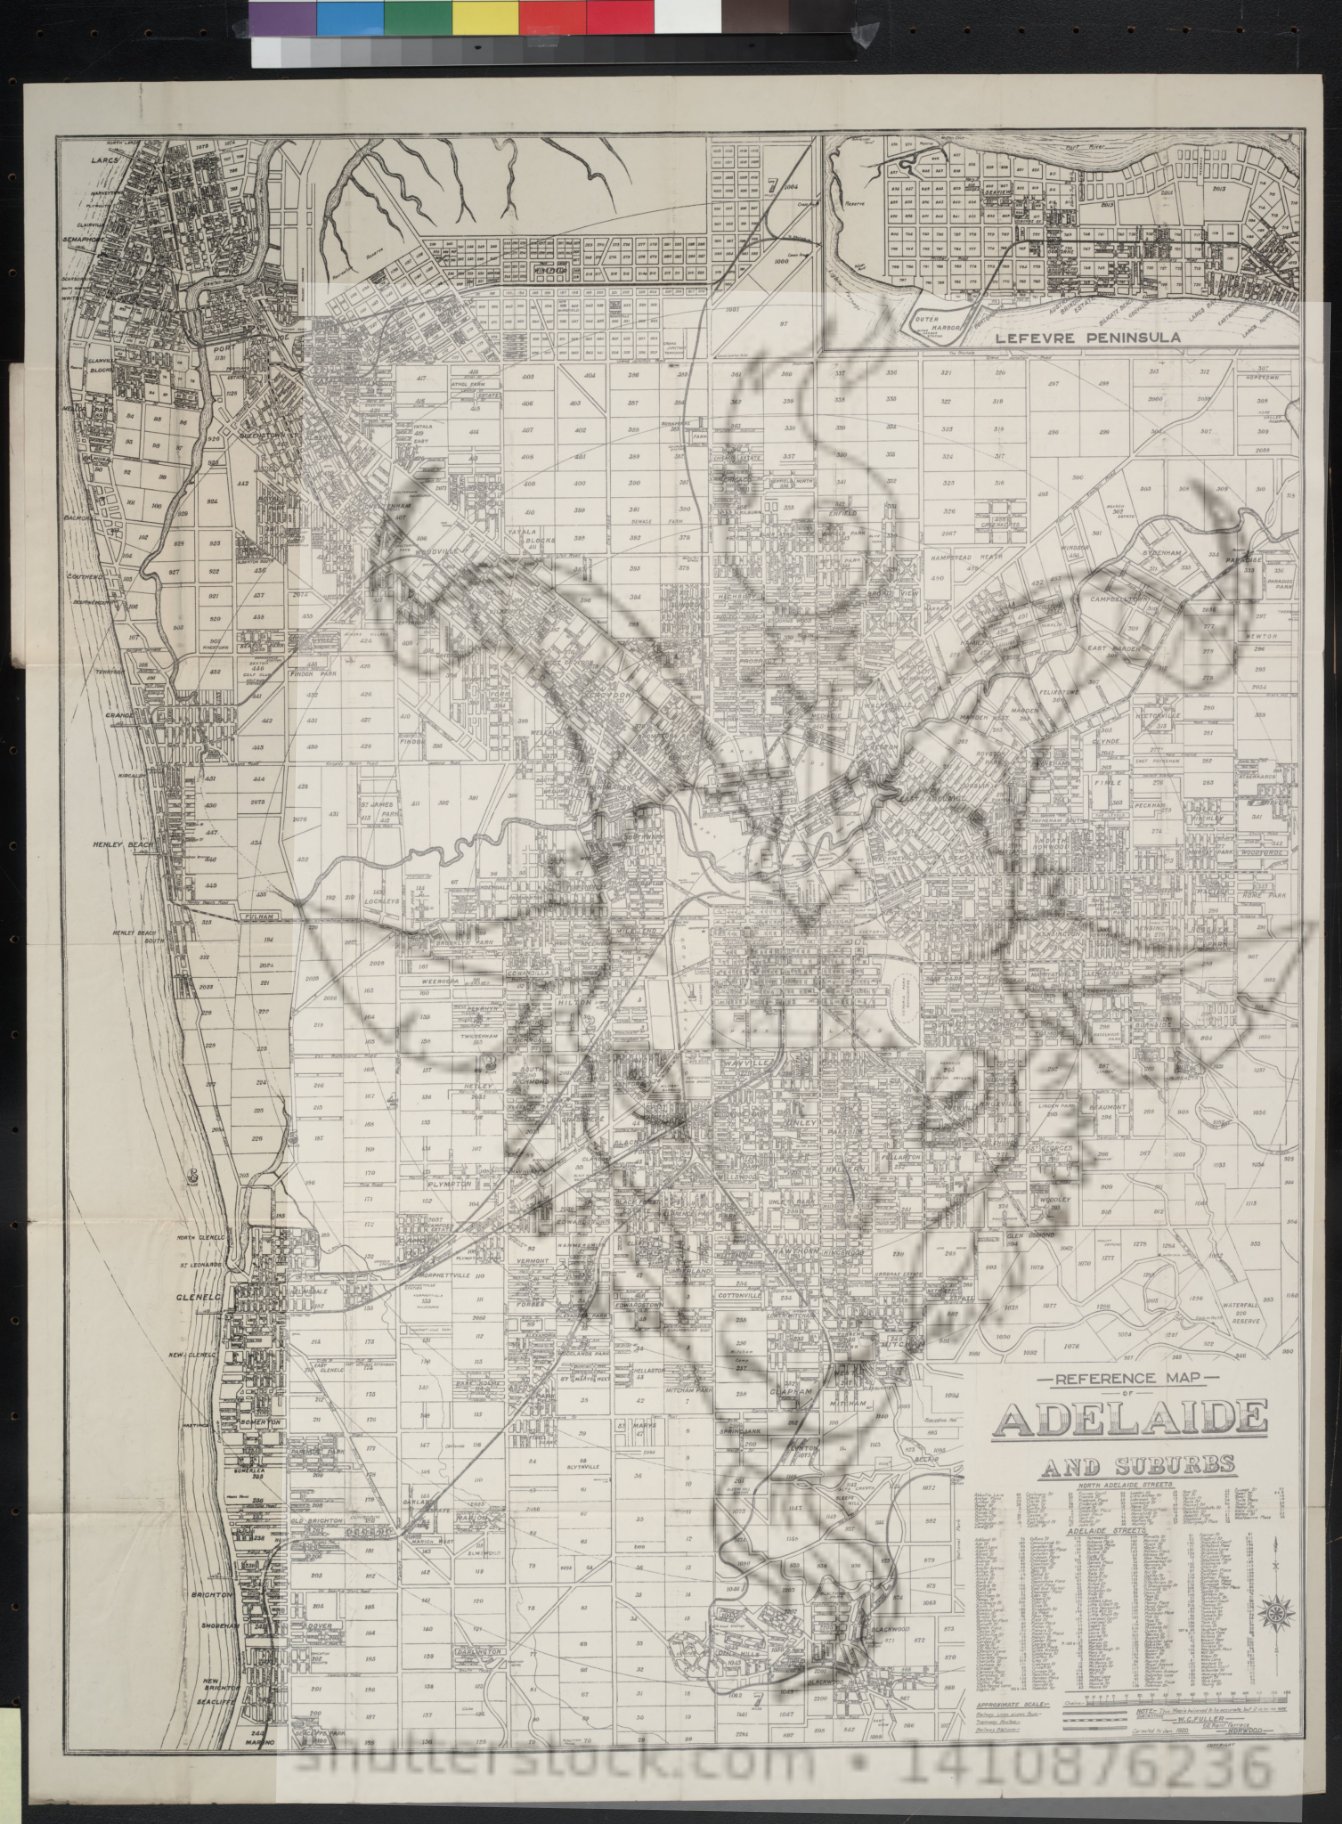 1920s Adelaide map overlaid with the face of Baphomet